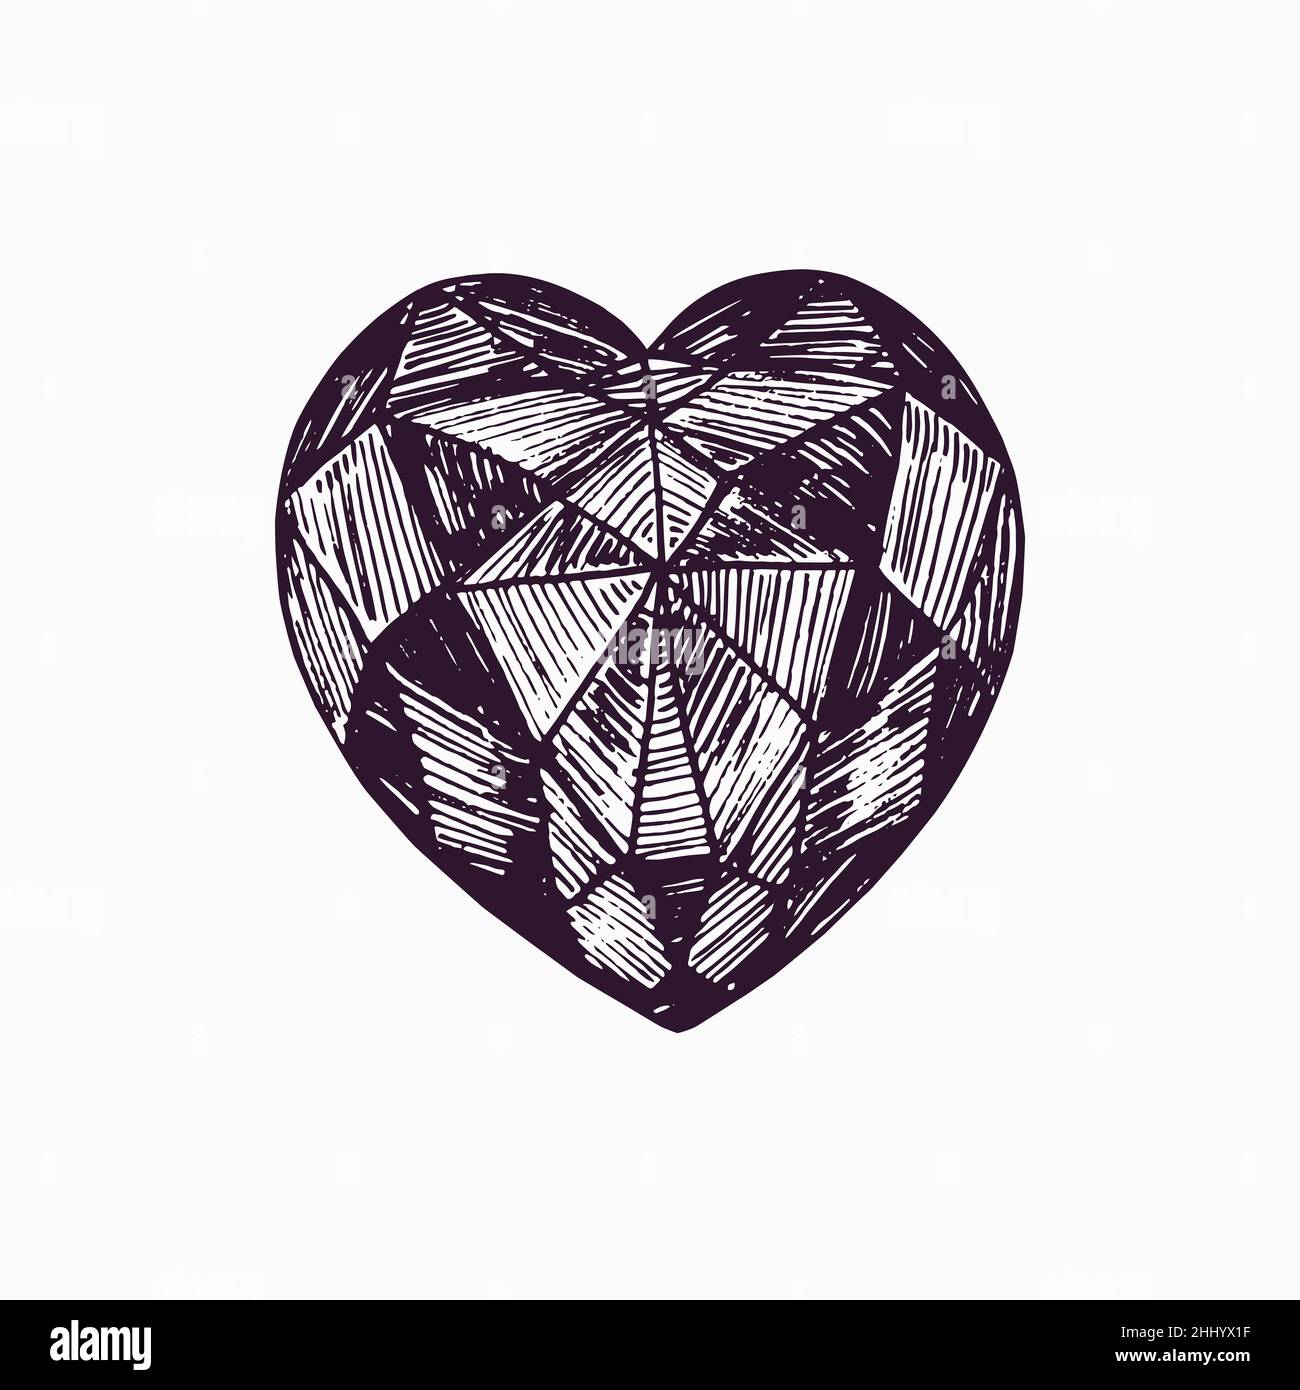 Heart shaped crystal, simple doodle drawing, gravure style Stock Photo